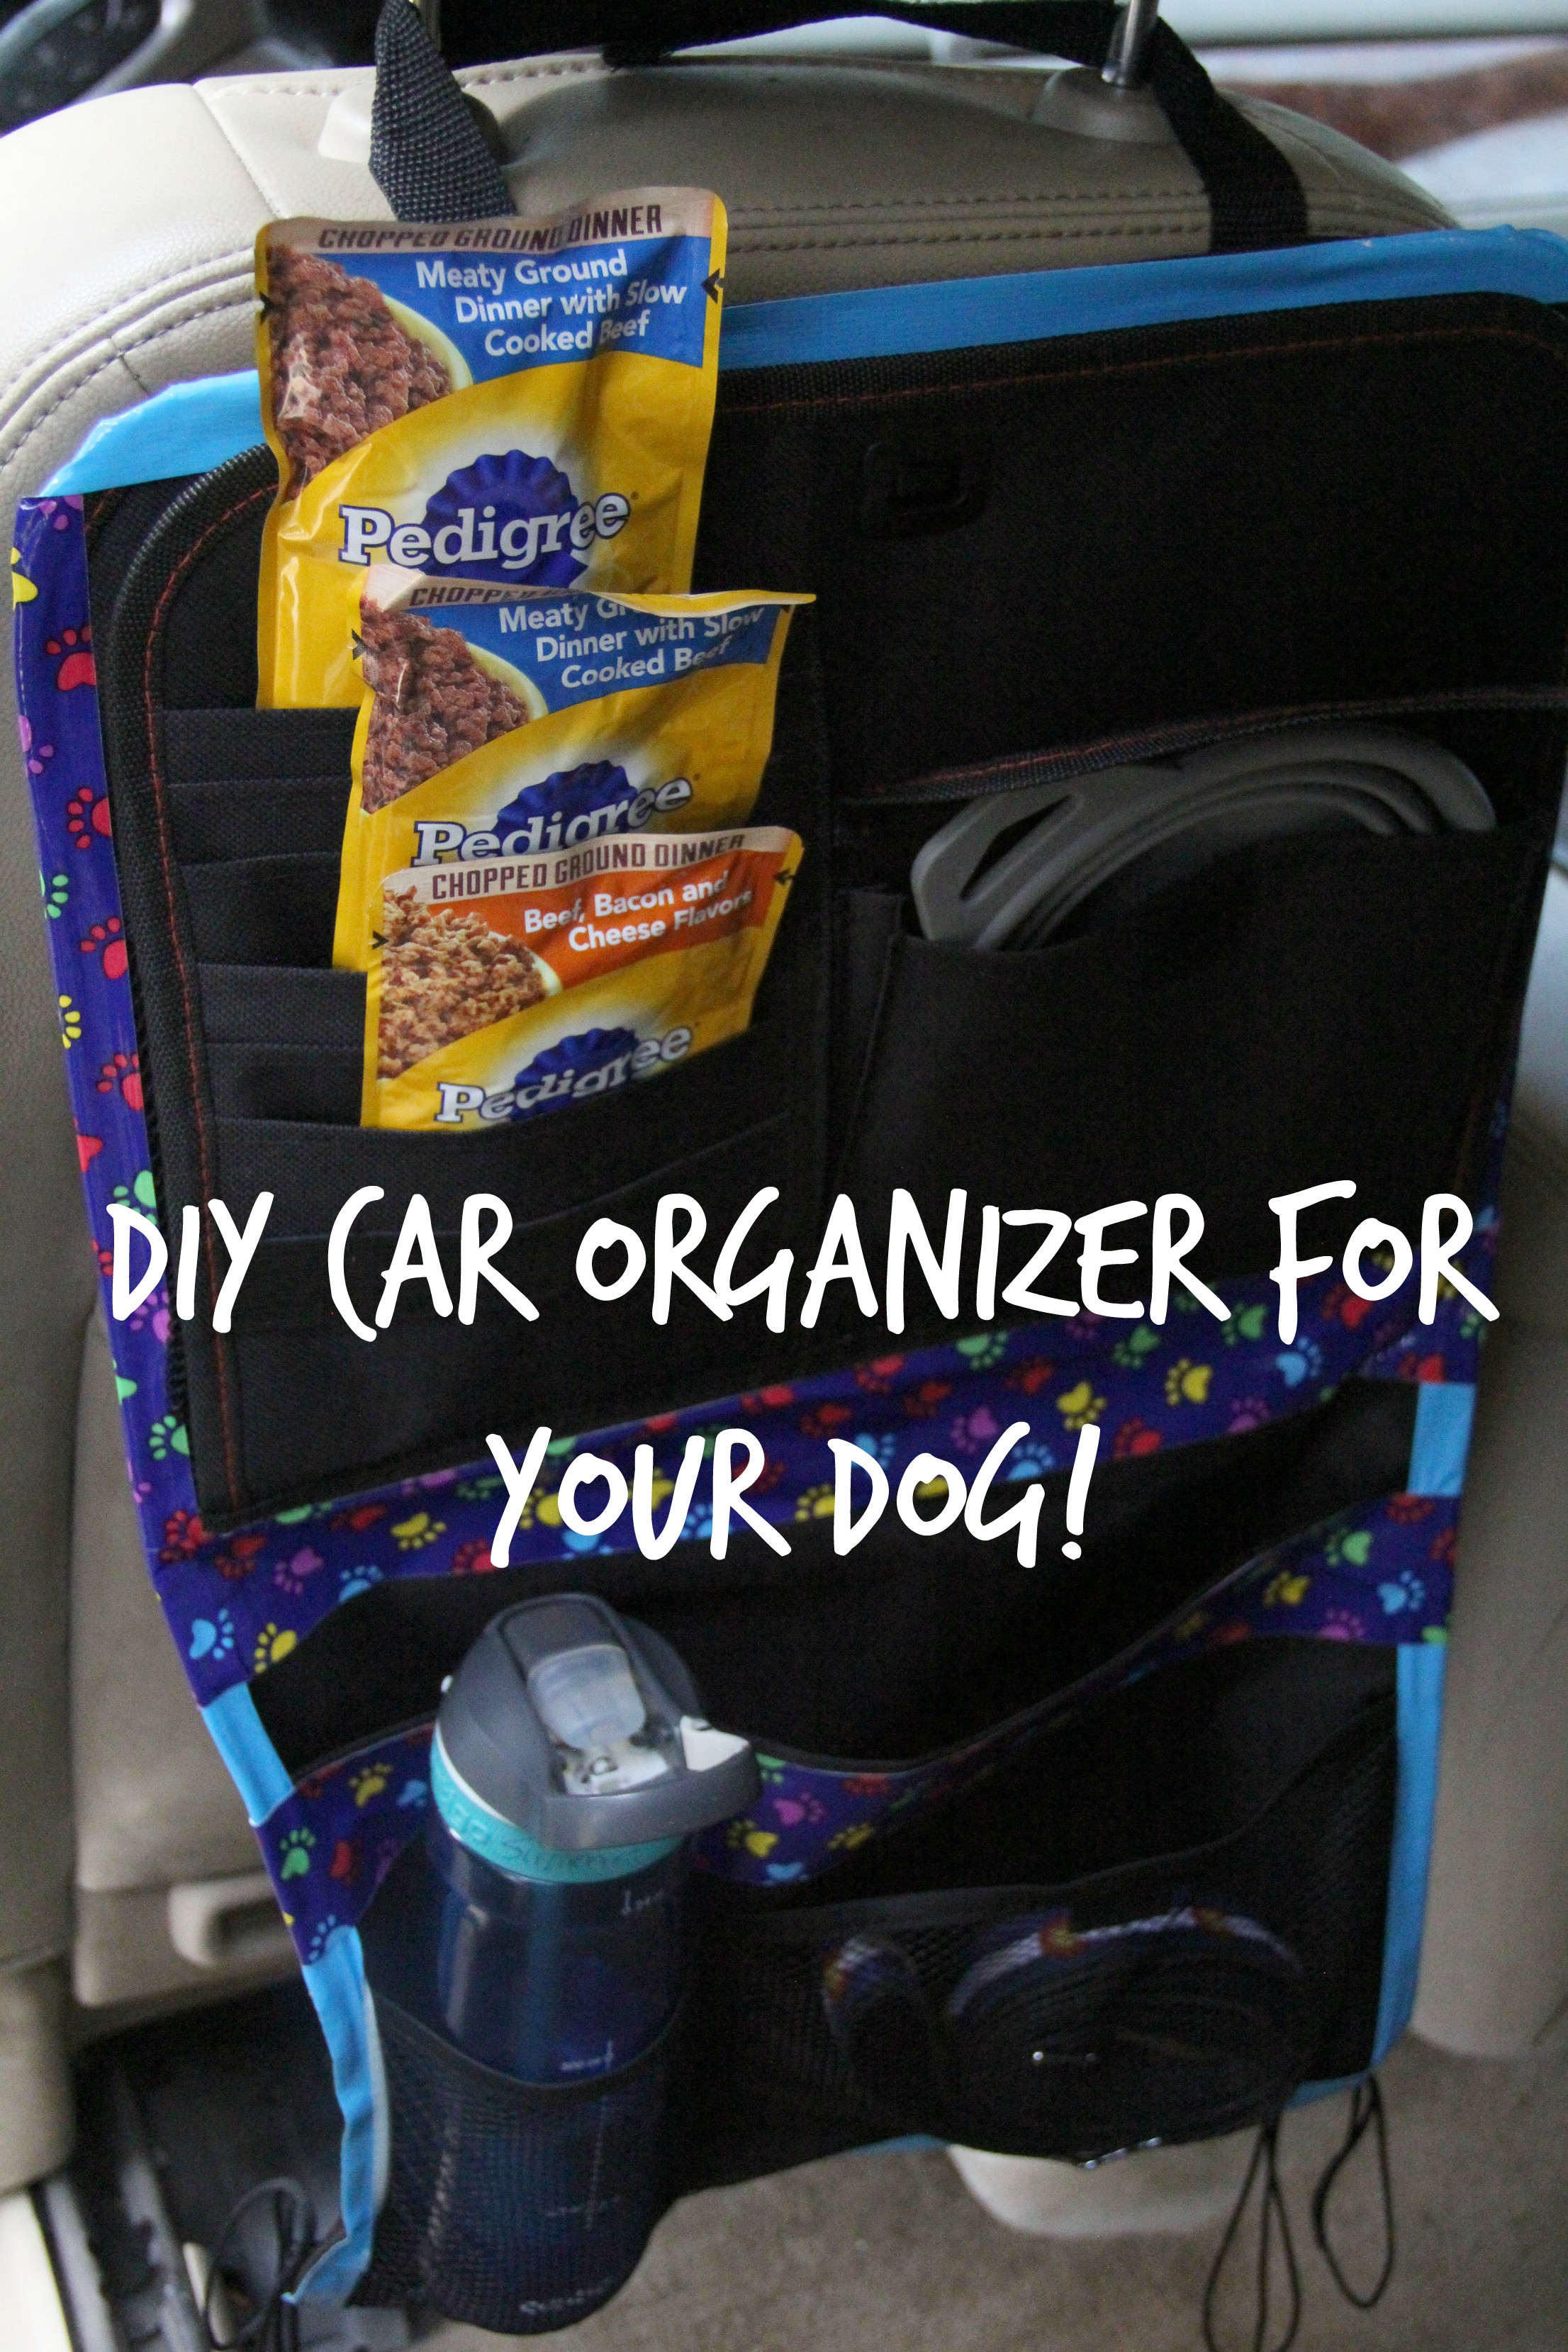 DIY Car Organizer
 Check out this DIY Car organizer for your dog with